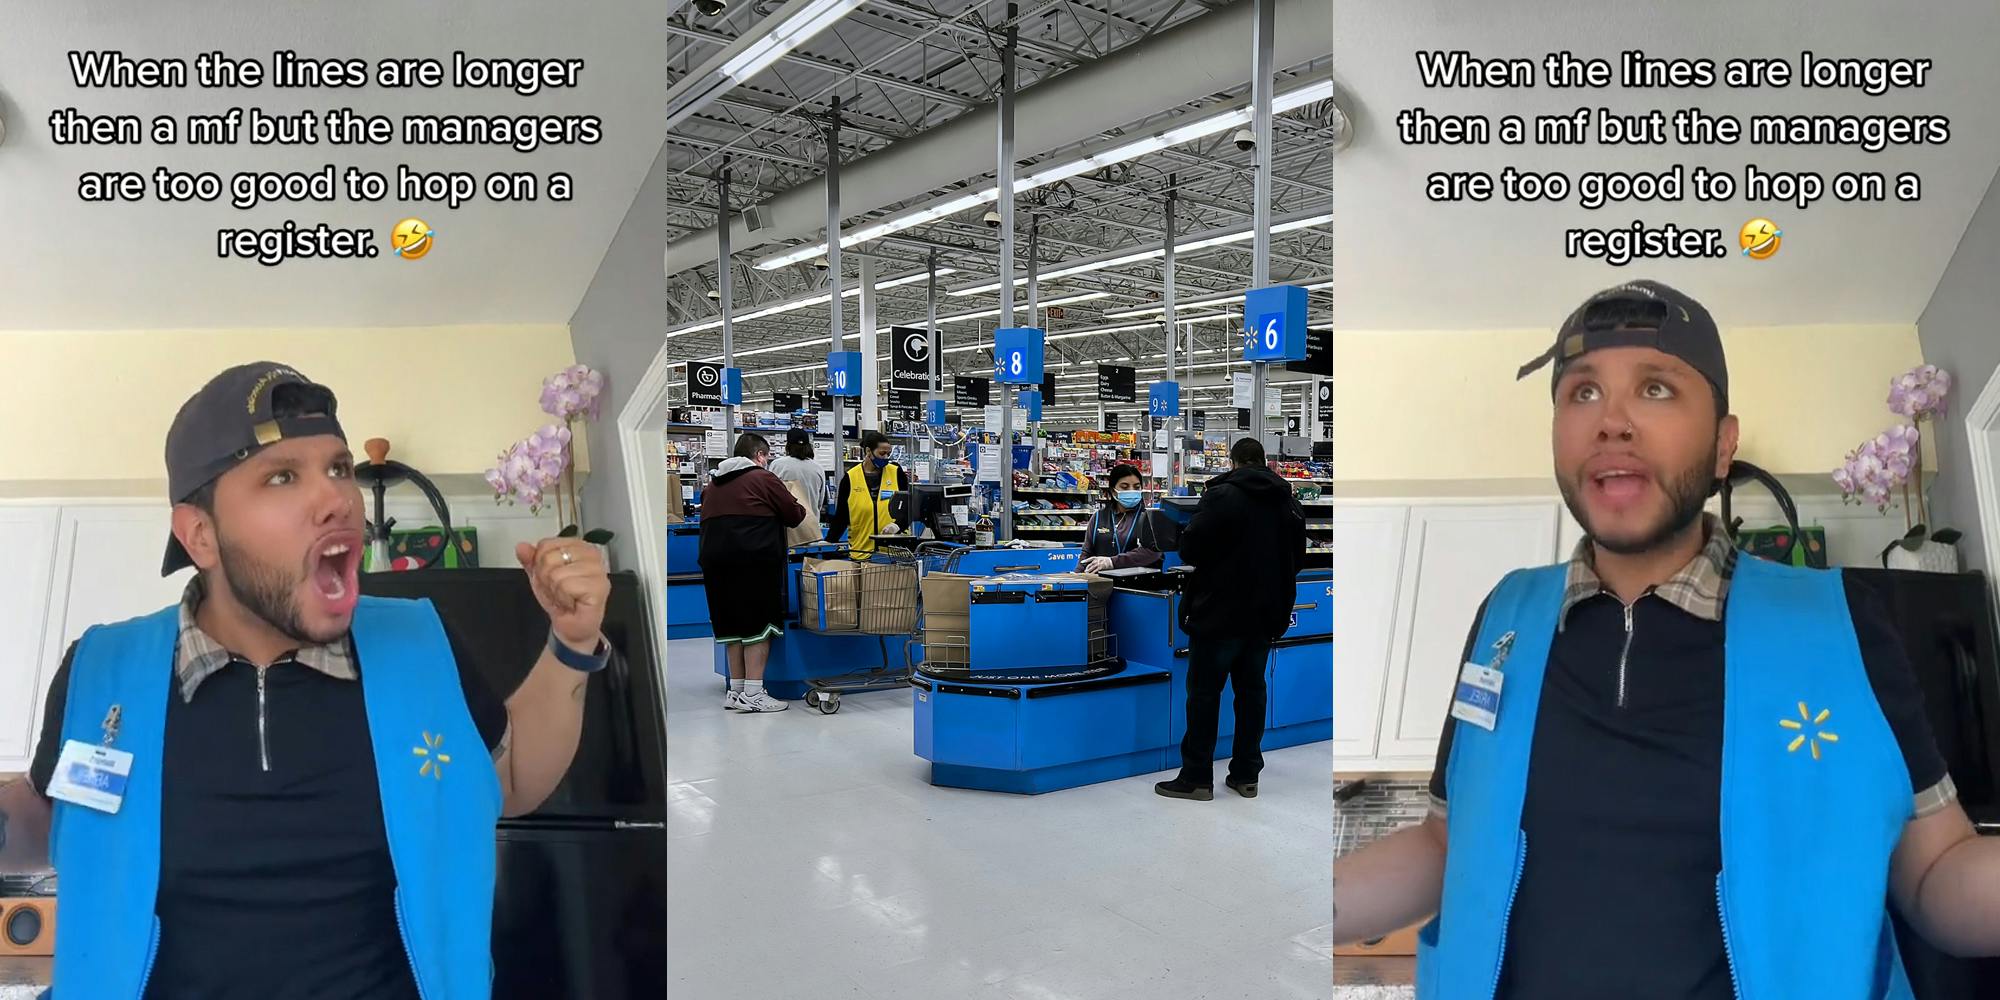 Walmart employee speaking with caption "When the lines are longer than a mf but the managers are too good to hop on a register." (l) Walmart checkout with customers and workers (c) Walmart employee speaking with caption "When the lines are longer than a mf but the managers are too good to hop on a register." (r)